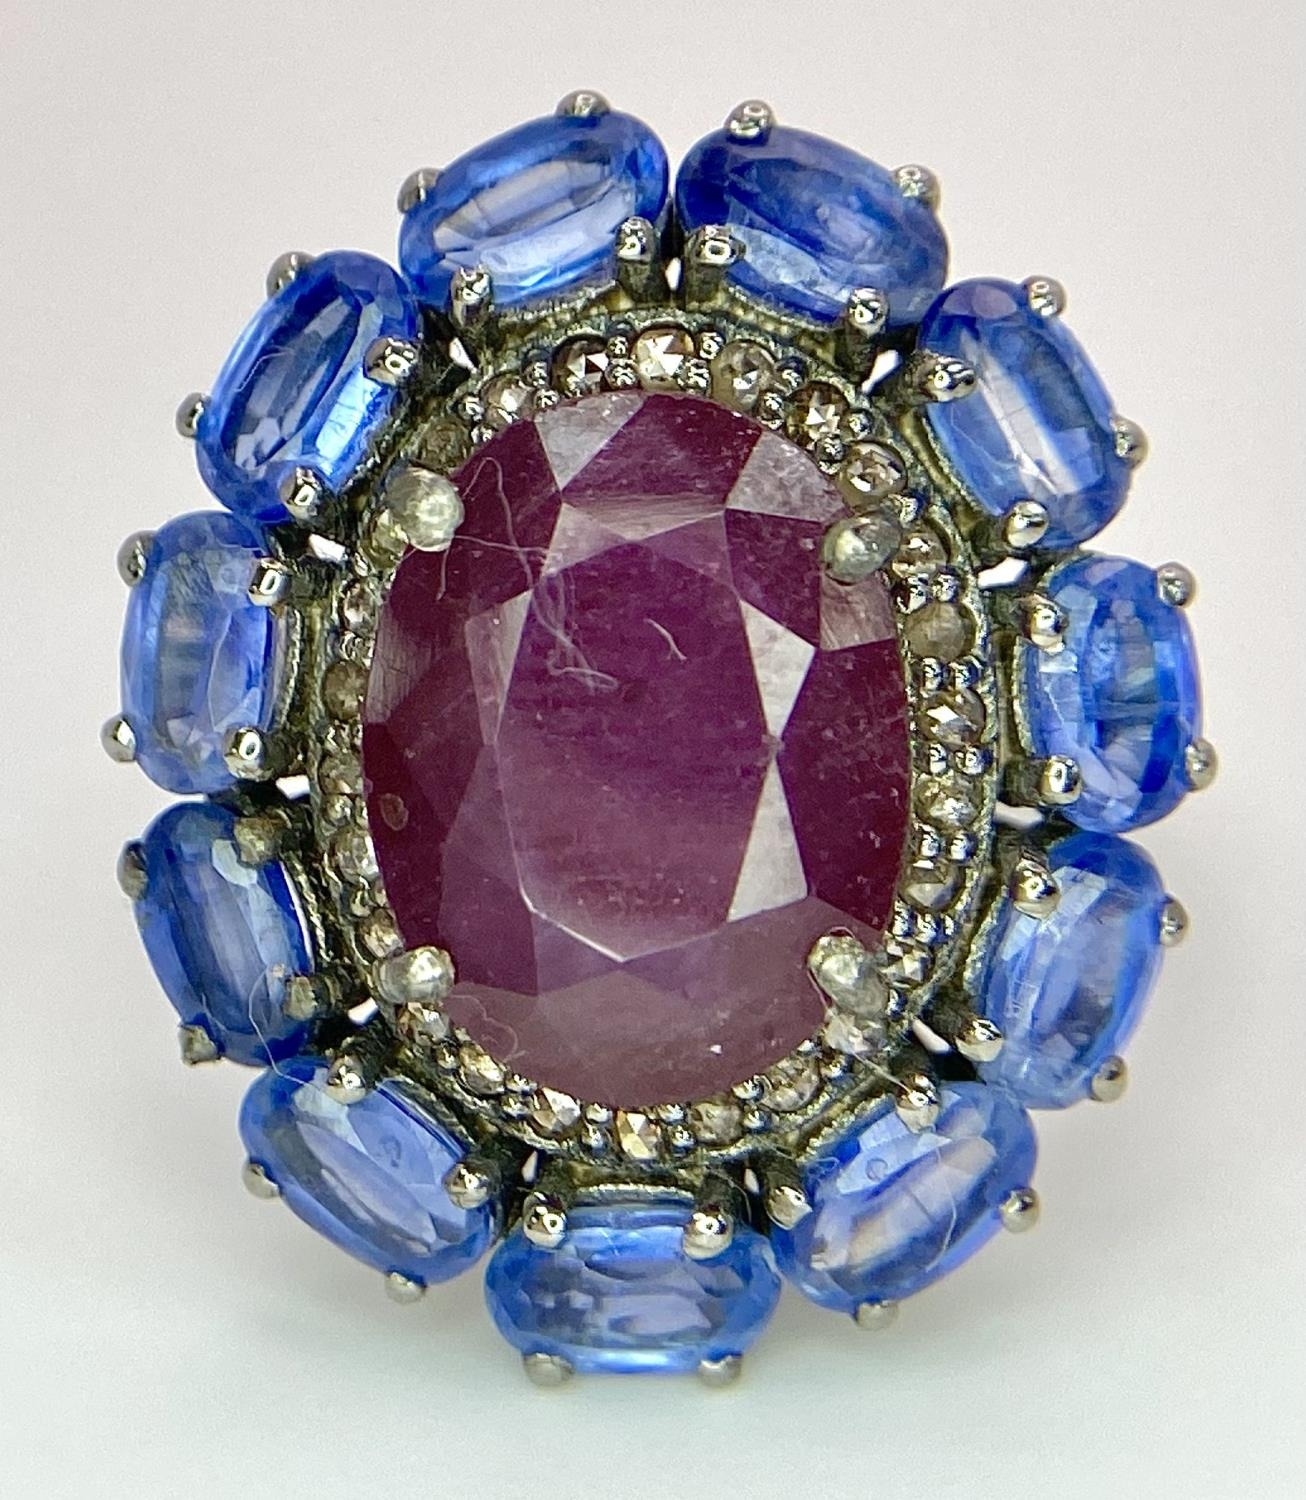 A 5.65ct Ruby Dress Ring with Halo of 0.40ctw of Diamonds and 3.70ct of Kyanite Stones. Set in 925 - Image 3 of 7